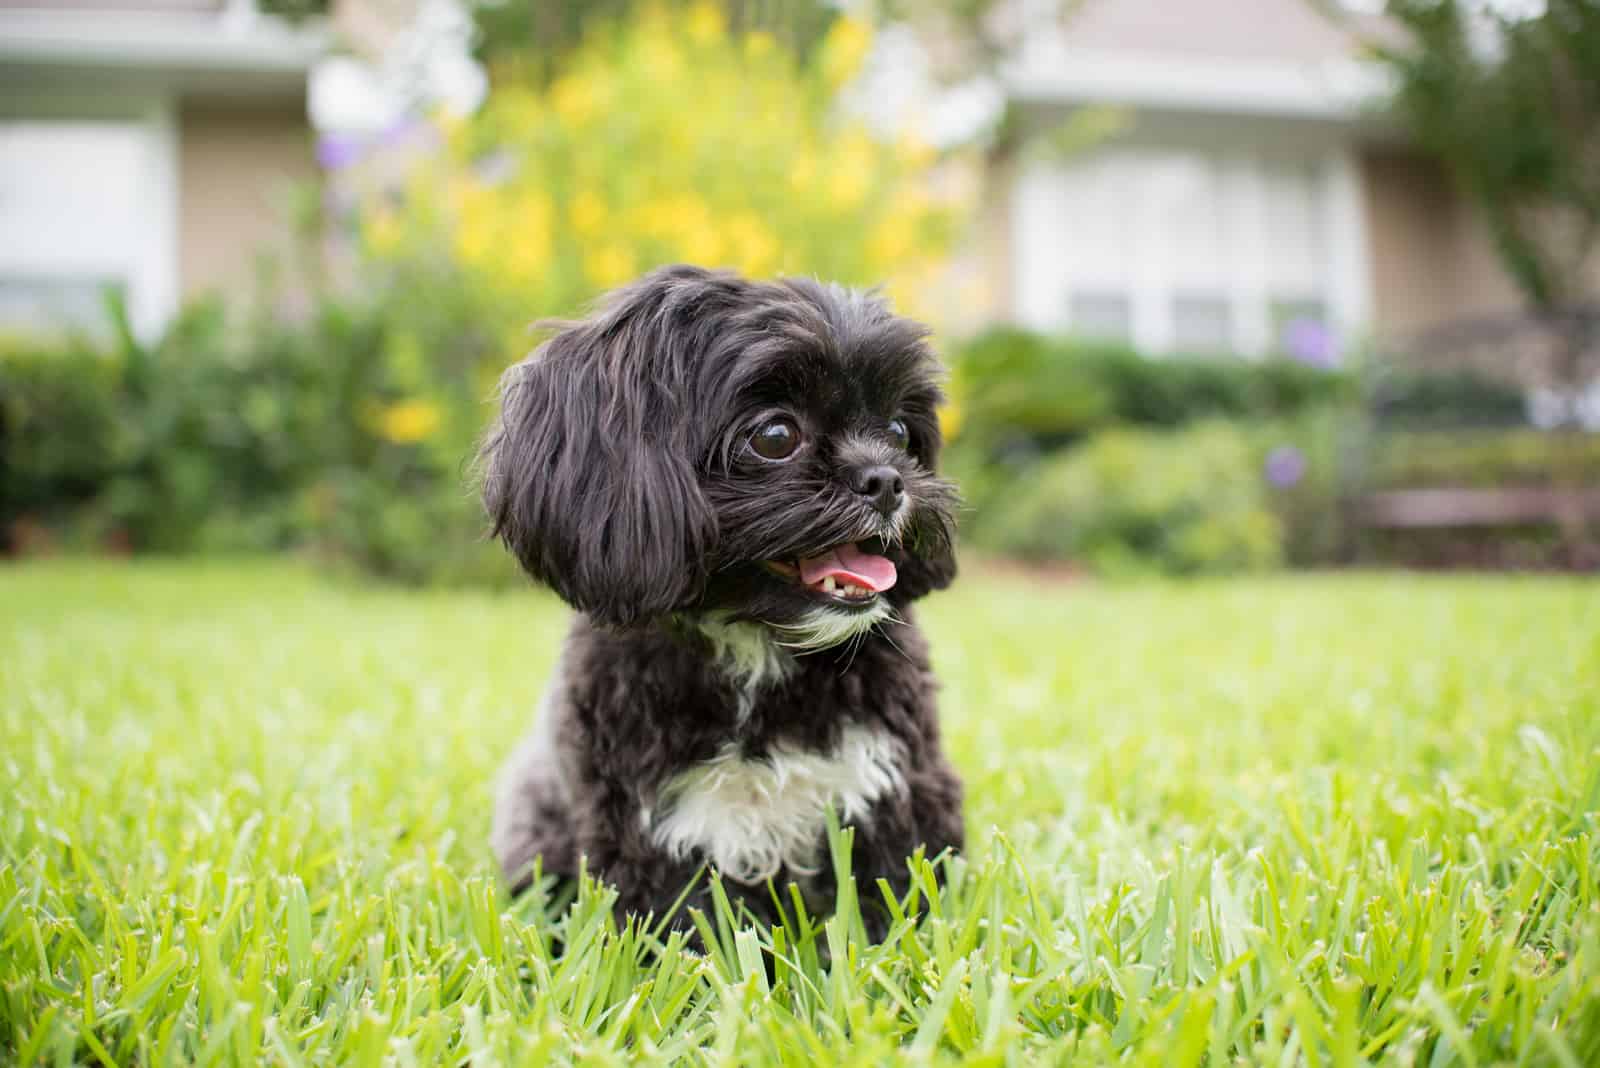 the adorable black Shih Tzu lies in the grass